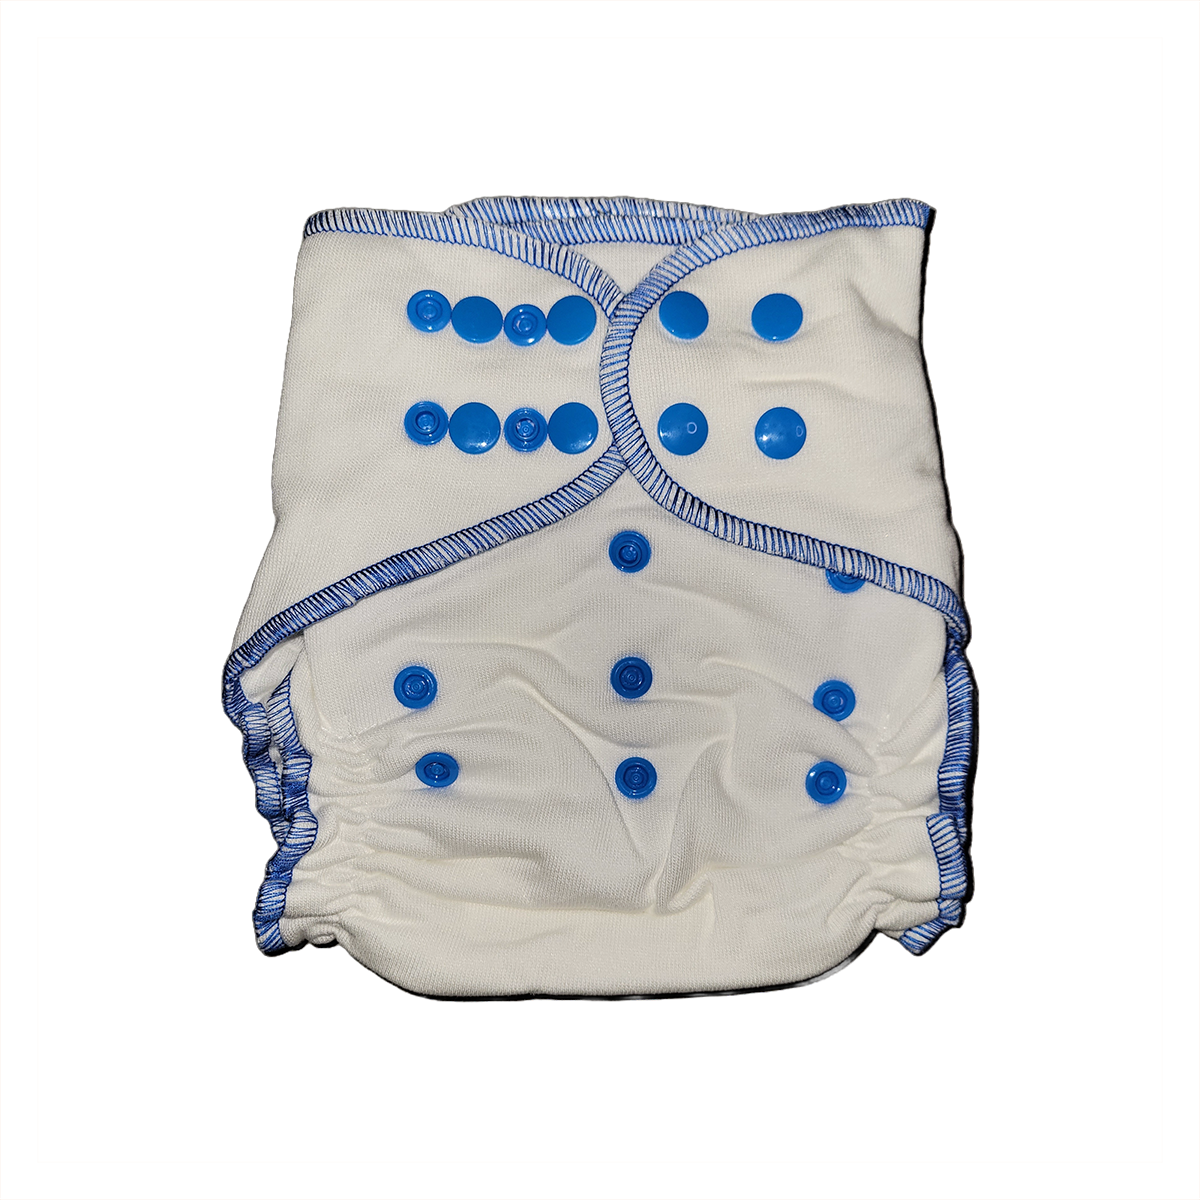 Bamboo Cotton midsize™ fitted diaper - Lapis Lazuli